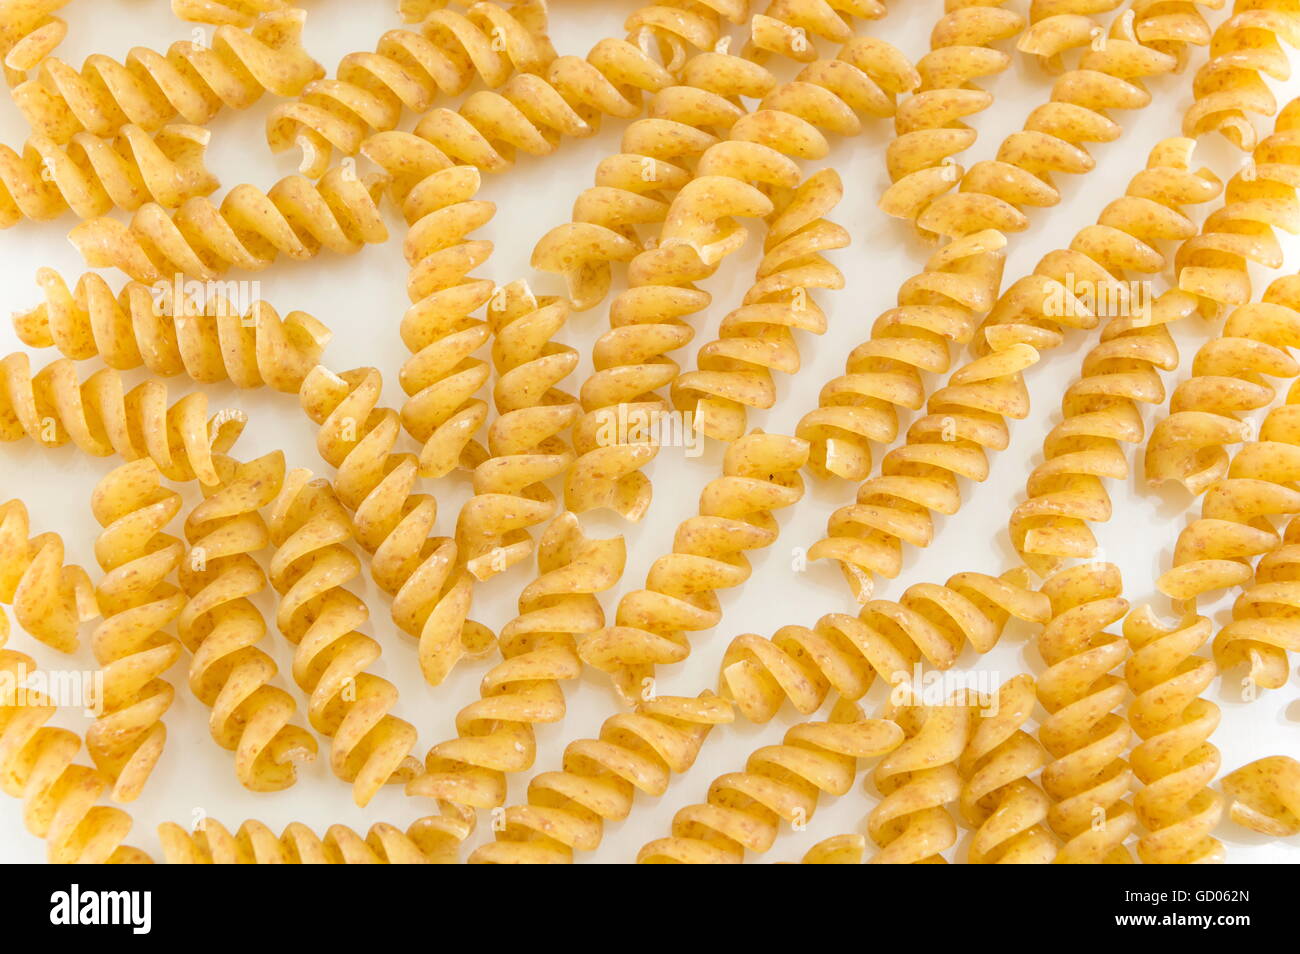 Bunch of golden colored macaroni pasta on a table Stock Photo